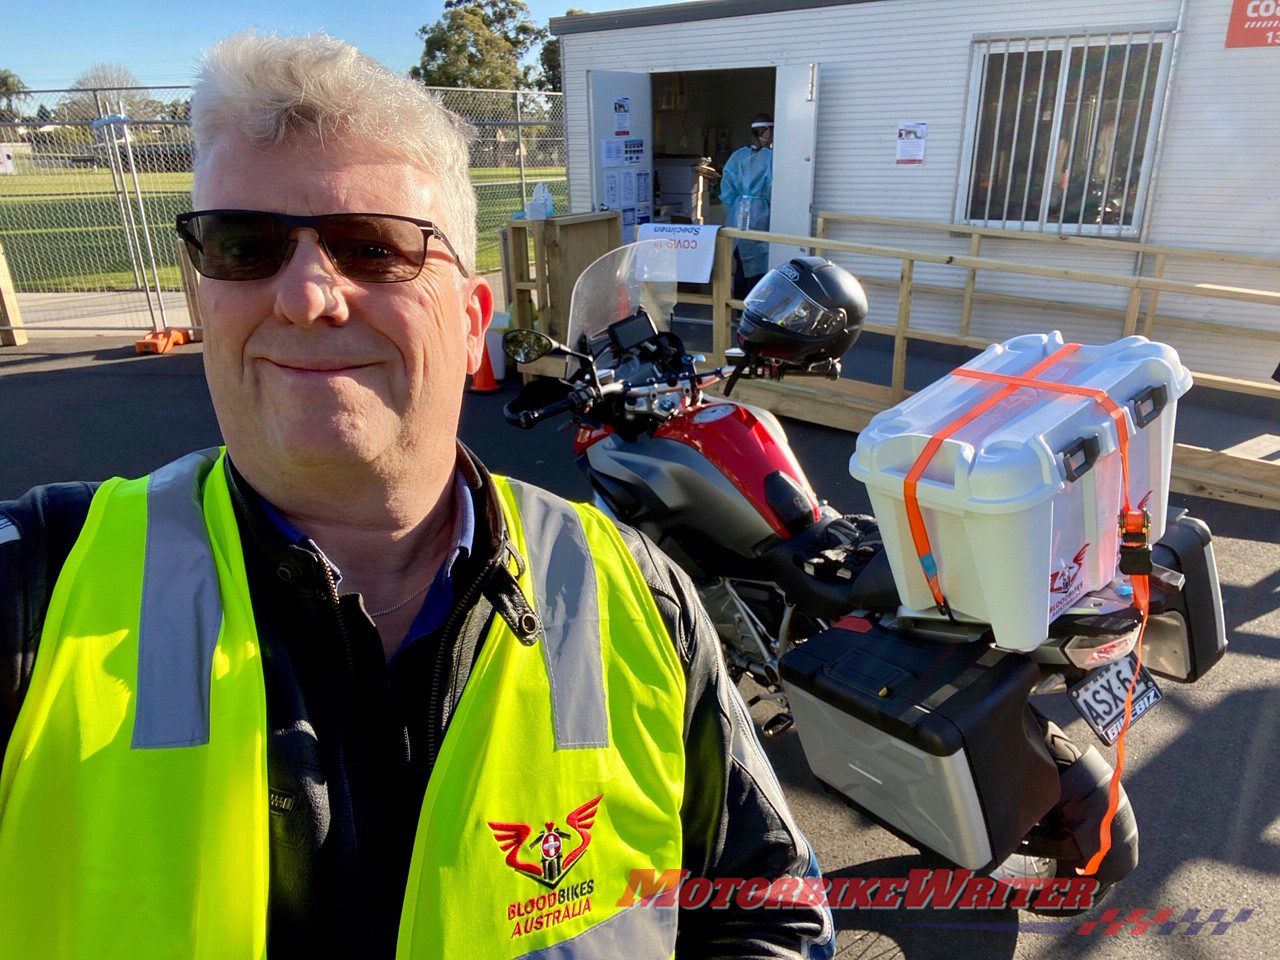 Bloodbikes Australia has become an integral part of transporting COVID-19 tests from testing centres to medical laboratories.